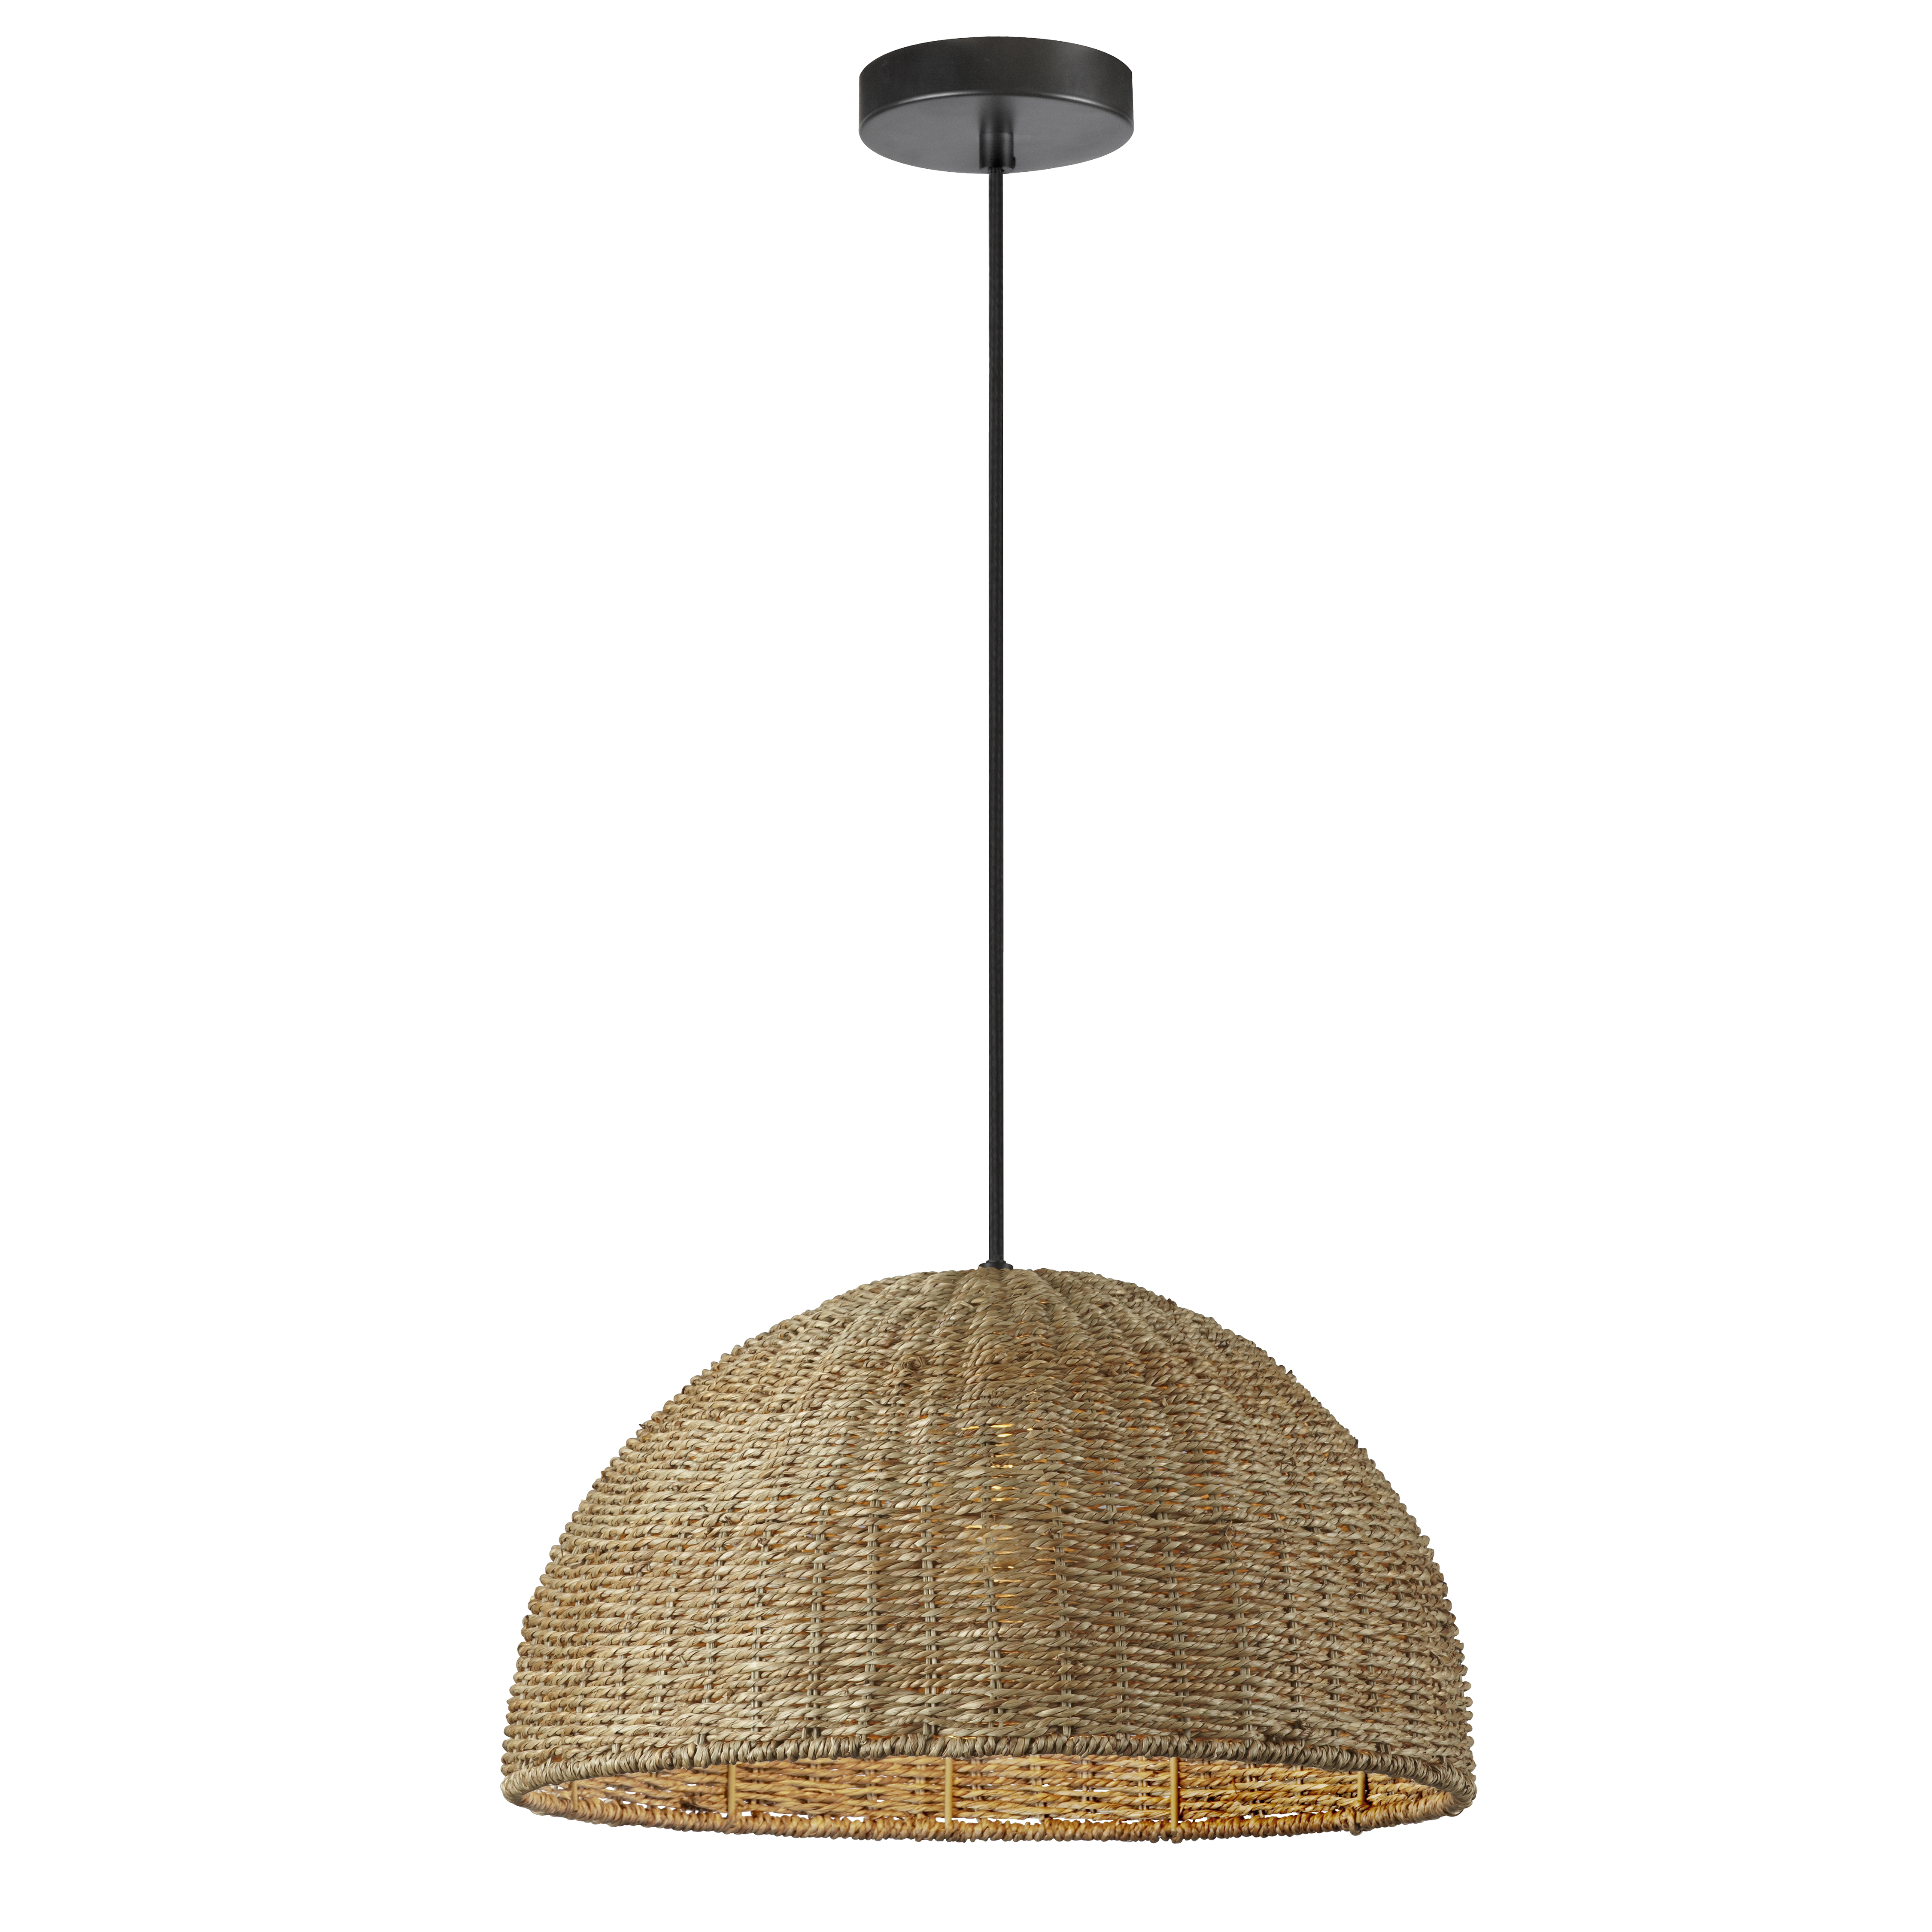 The traditional dome gets a softer finish in the Pourel family of lighting. The effect is organic, with a natural feel that blends with many different styles of décor. A metal frame in neutral matte black drops to a dome frame made of woven seagrass in a natural finish. It adds a neutral tone and soft lines that will create a striking contrast in minimalist modern homes. Pourel offers bright lighting and a subtle sense of style to your kitchen or living room.